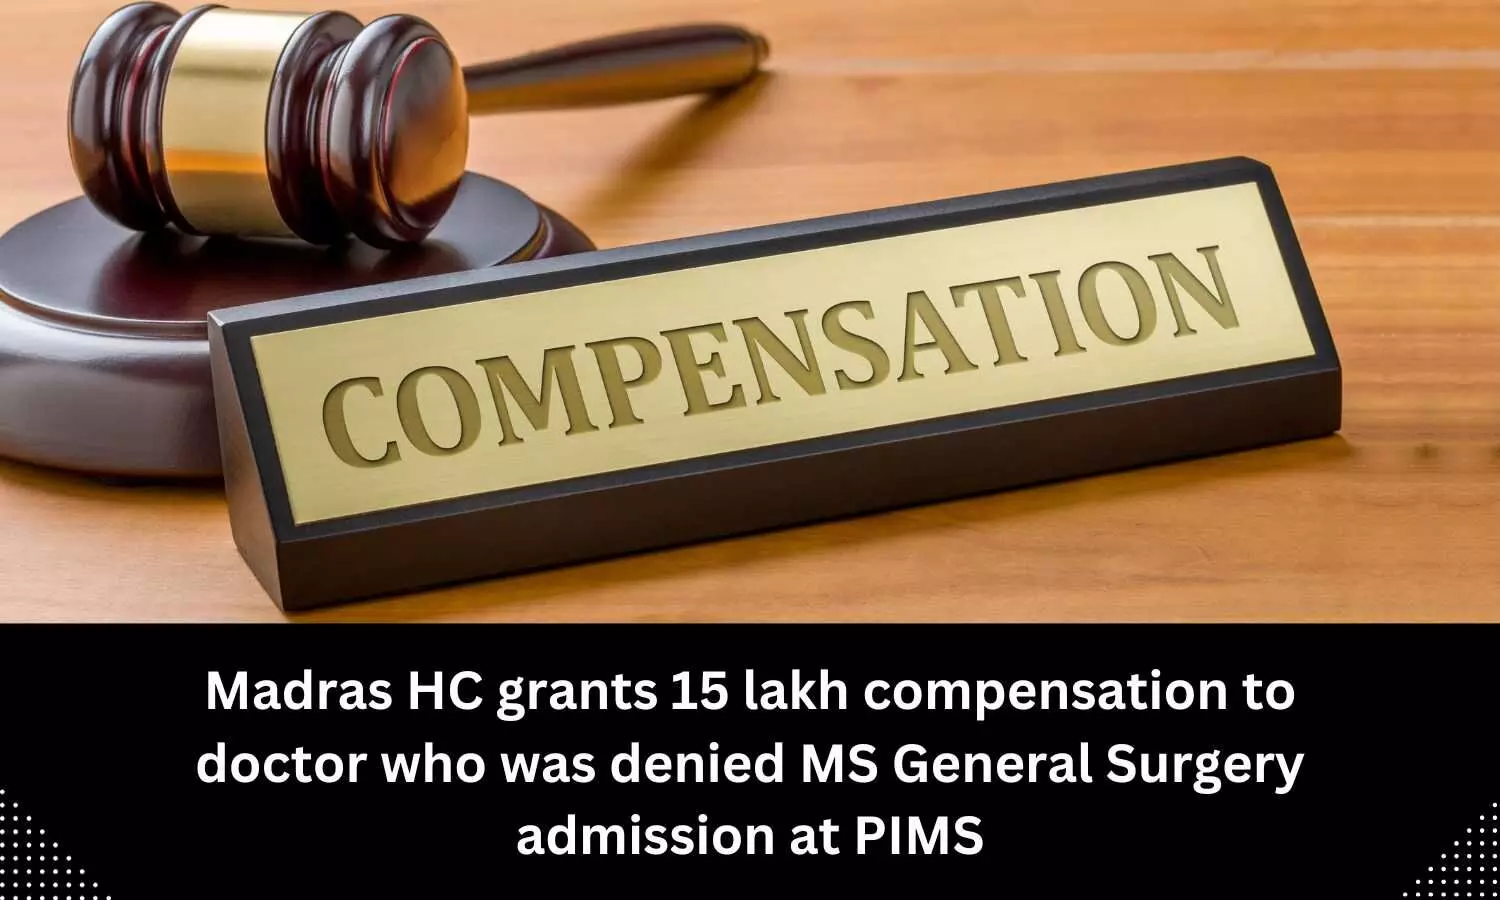 Pay Rs 15 lakh compensation to doctor who was denied MS General Surgery admission at PIMS: Madras HC directs PIMS, CENTAC